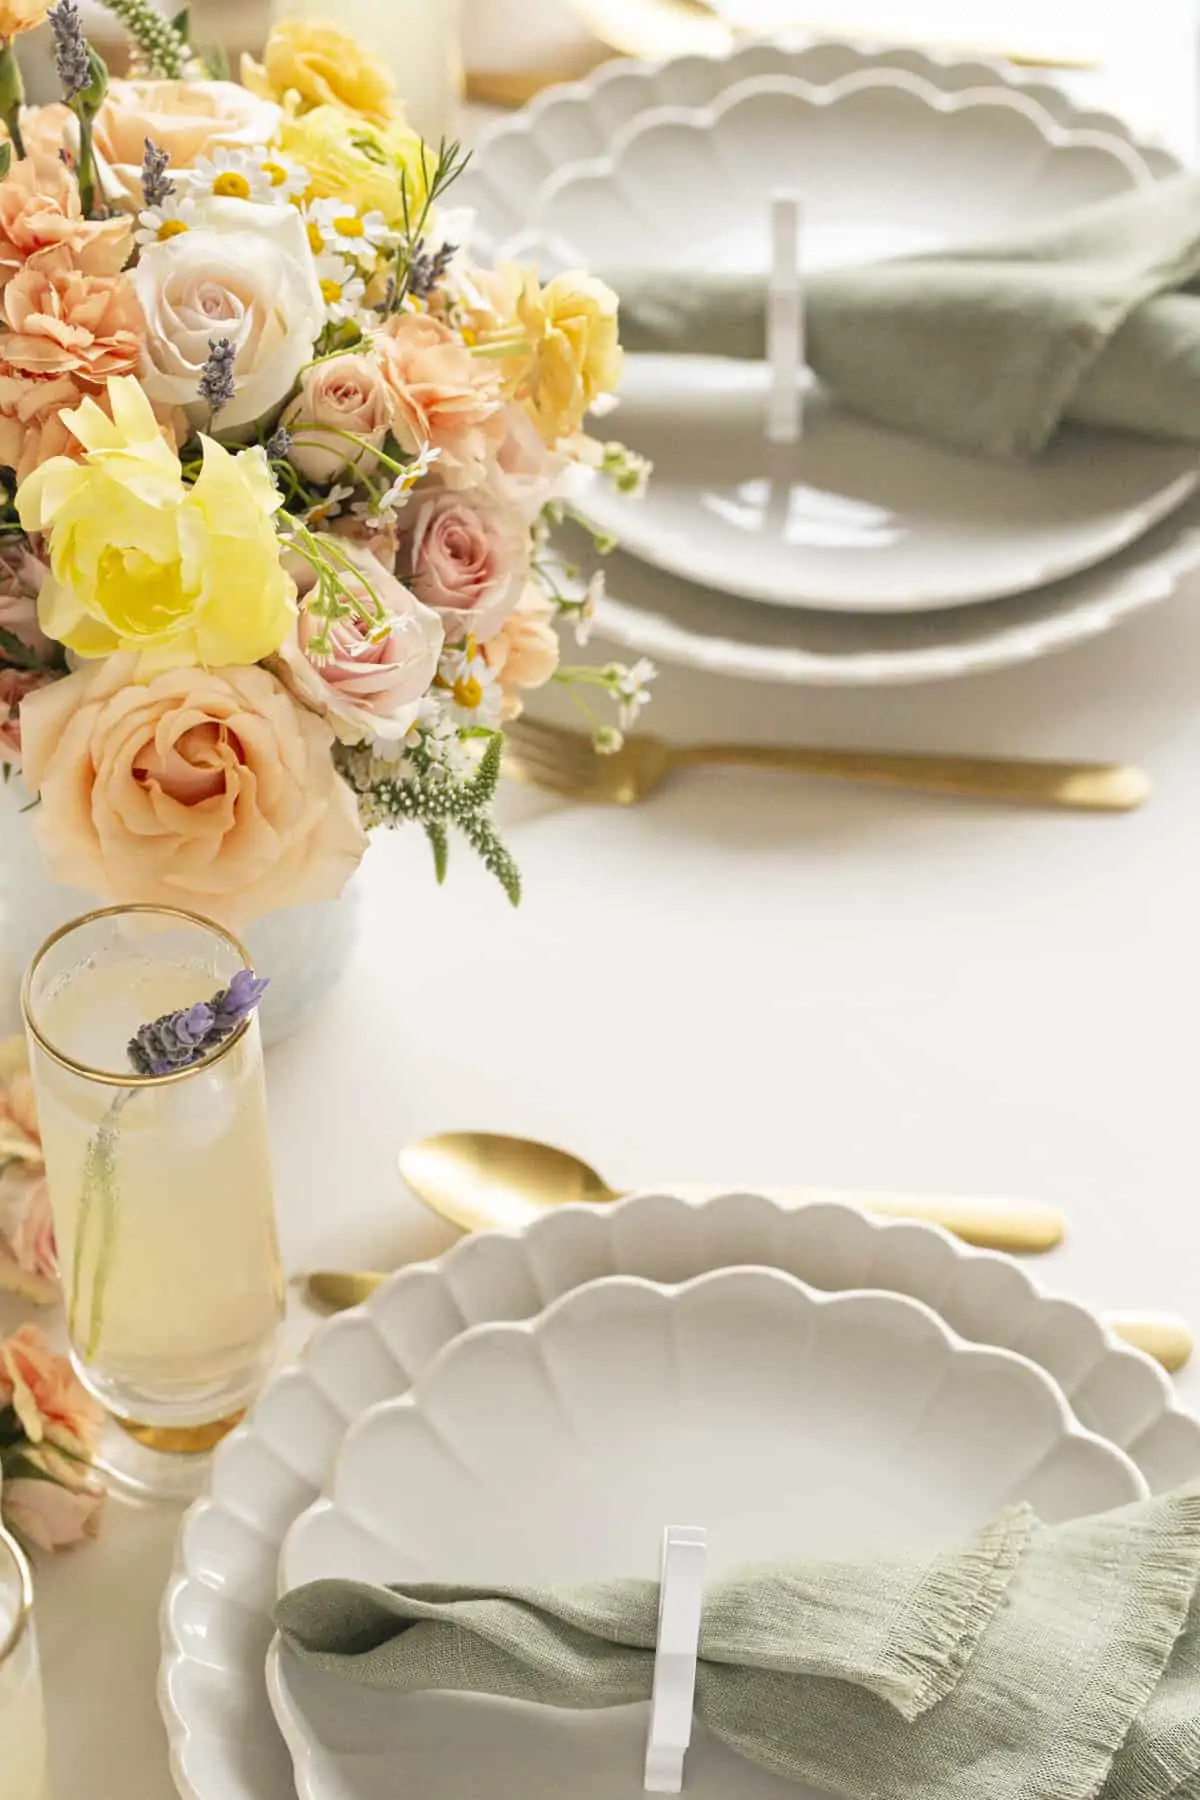 Easter tabletop decor with a pastel color palette